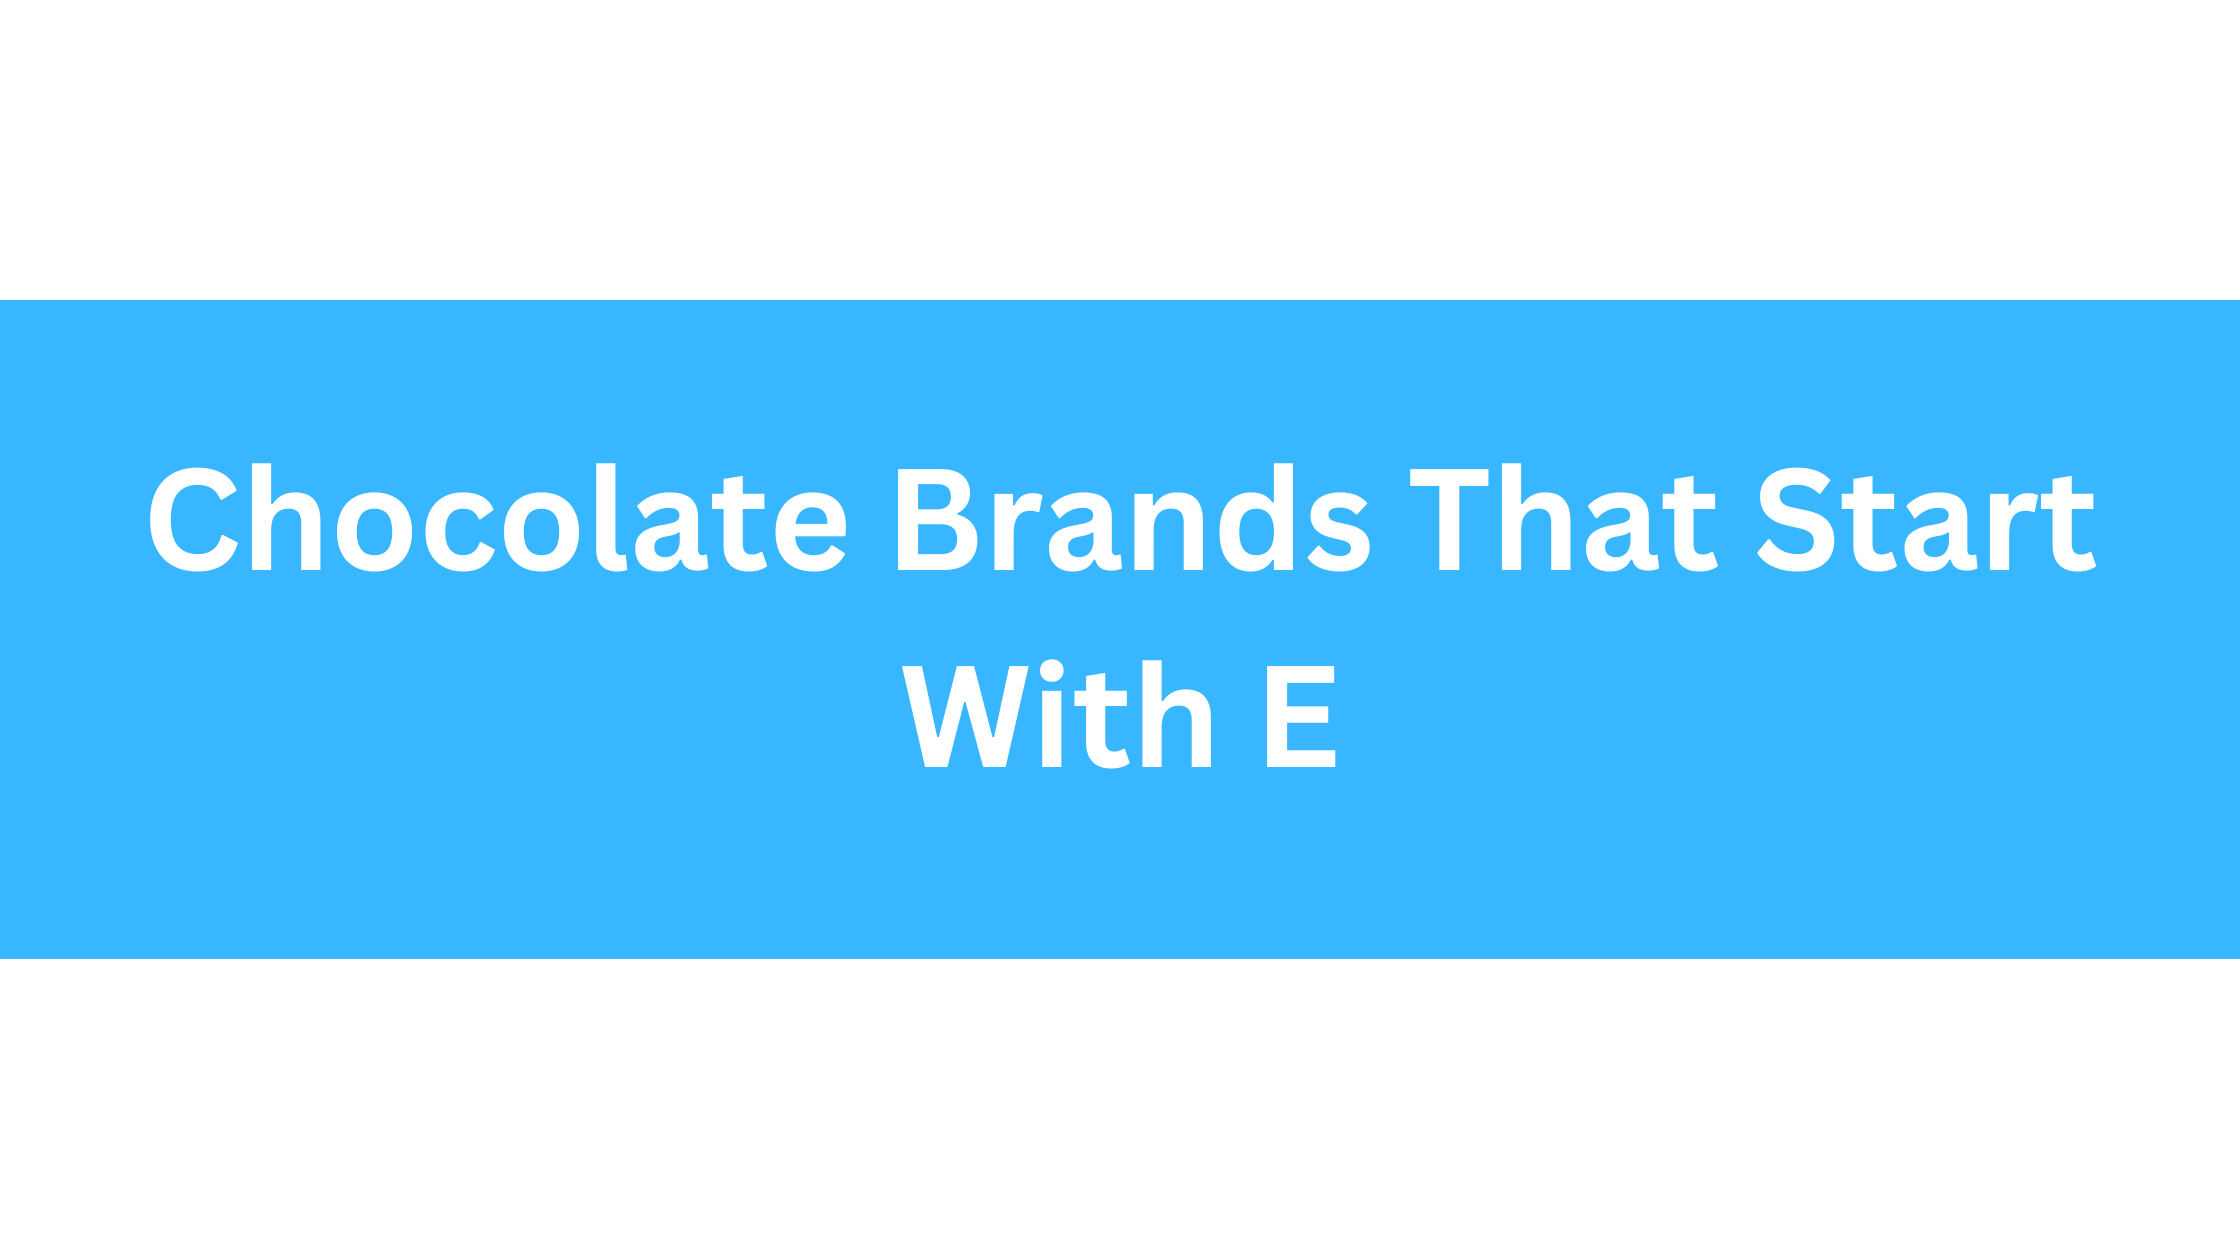 Chocolate Brands That Start With E